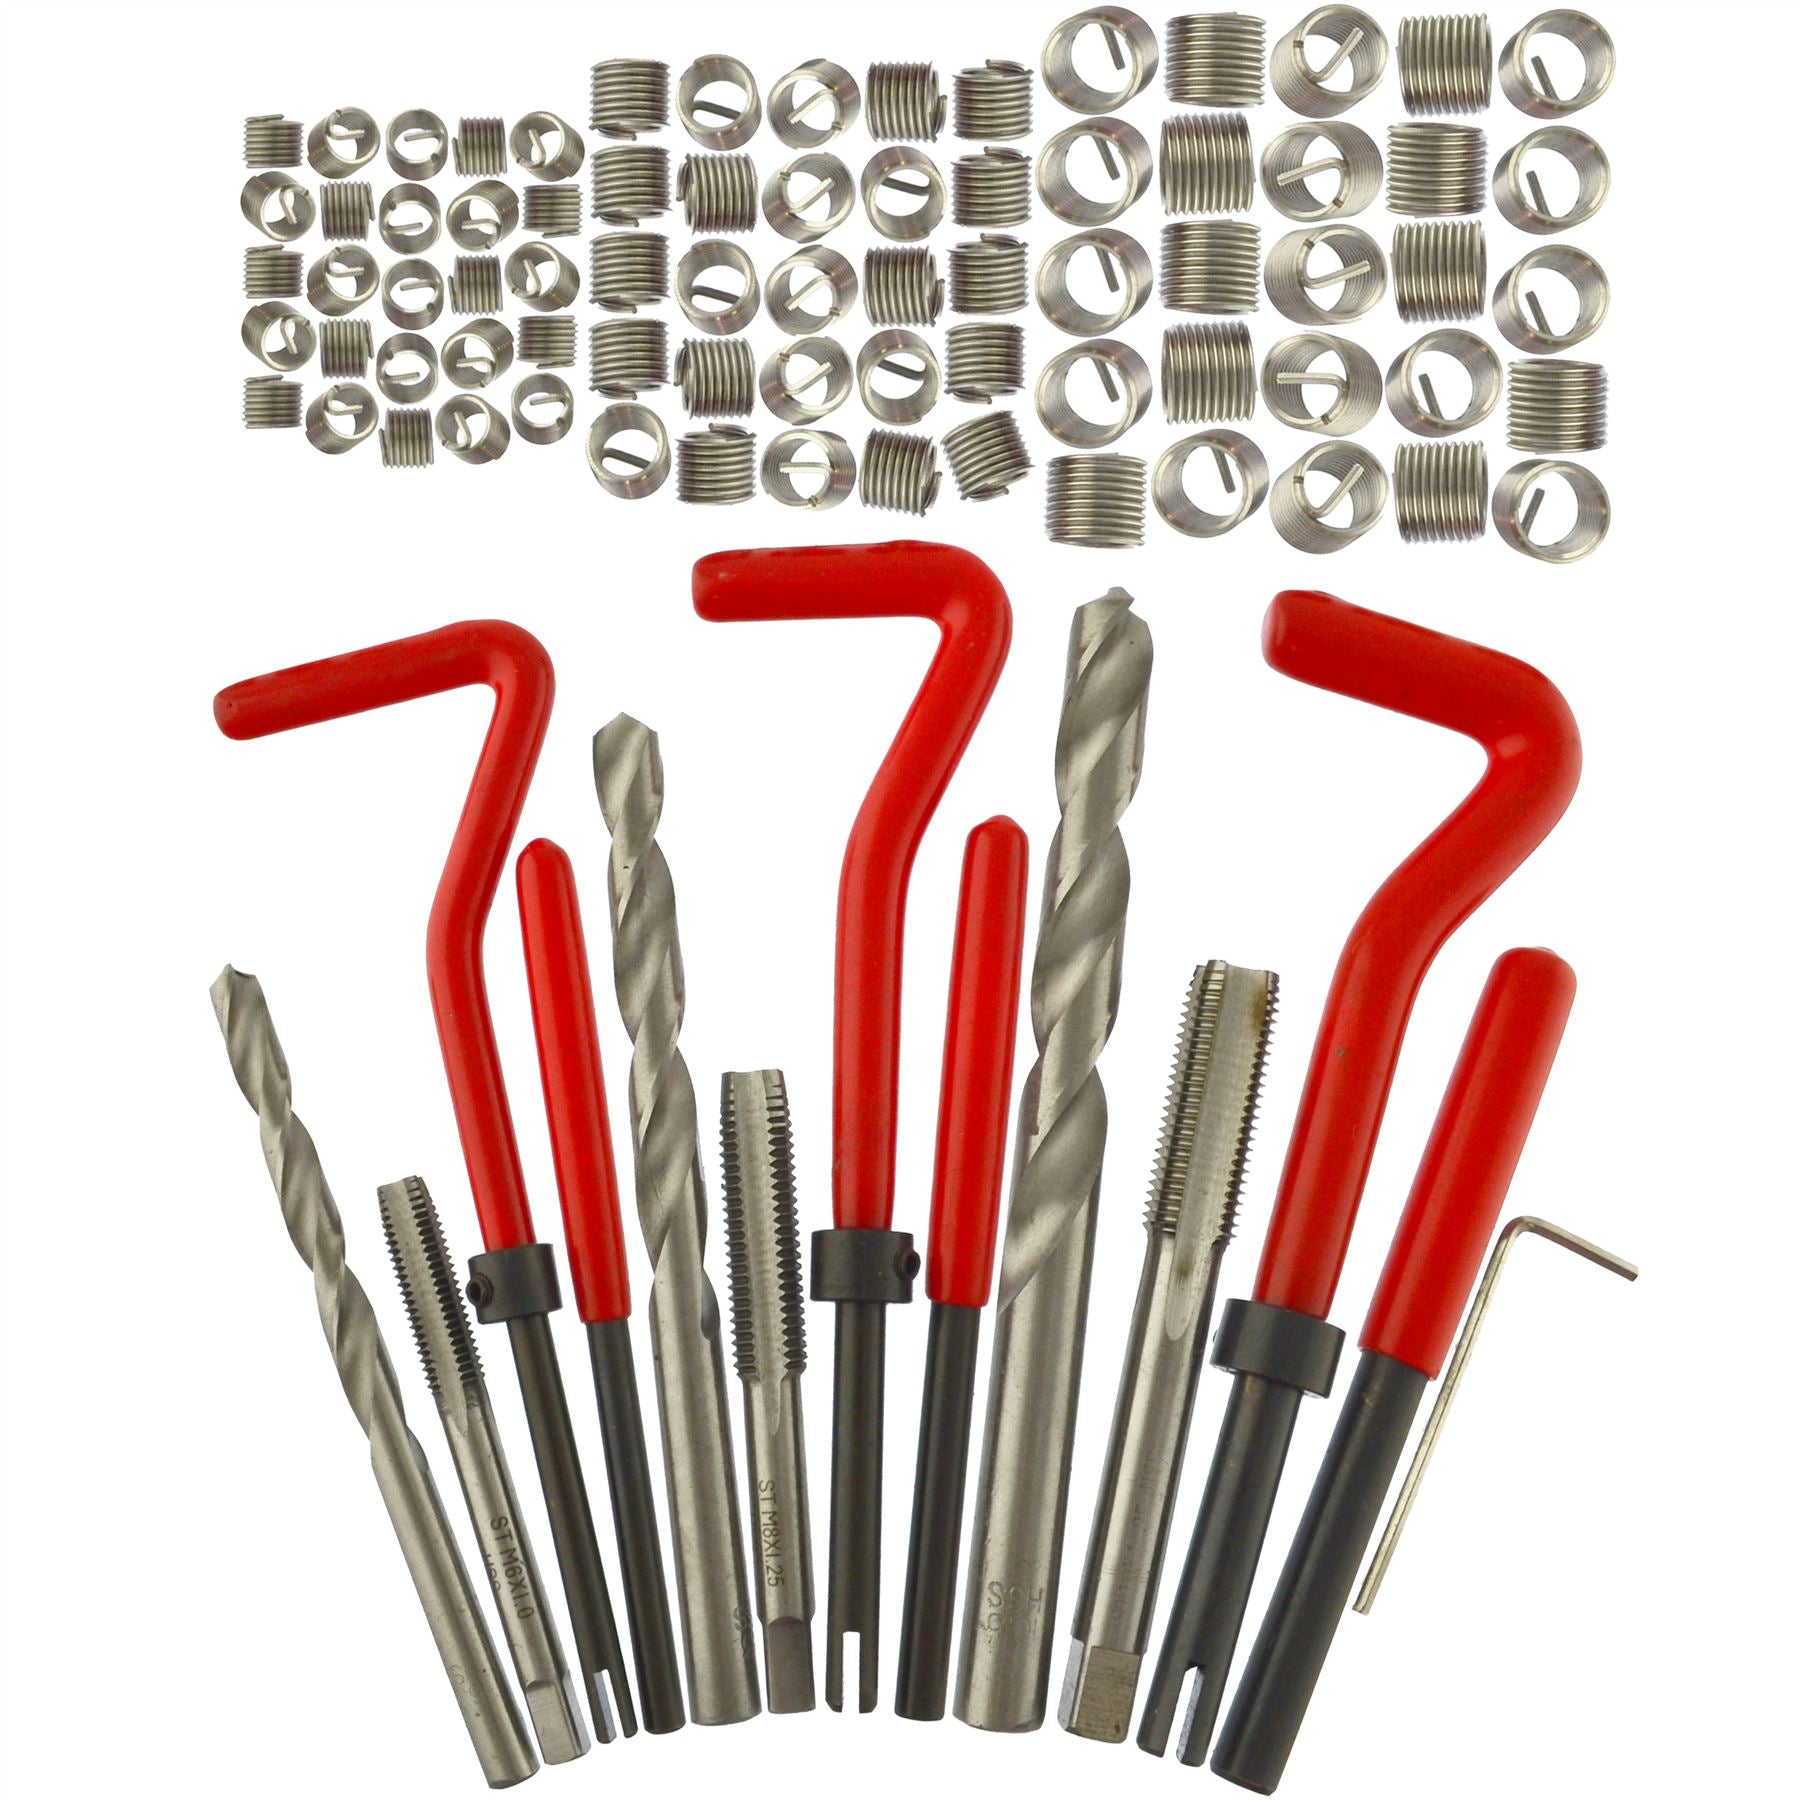 Thread installation and repair kit helicoil set 88pc metric sizes M6-M10 AN047